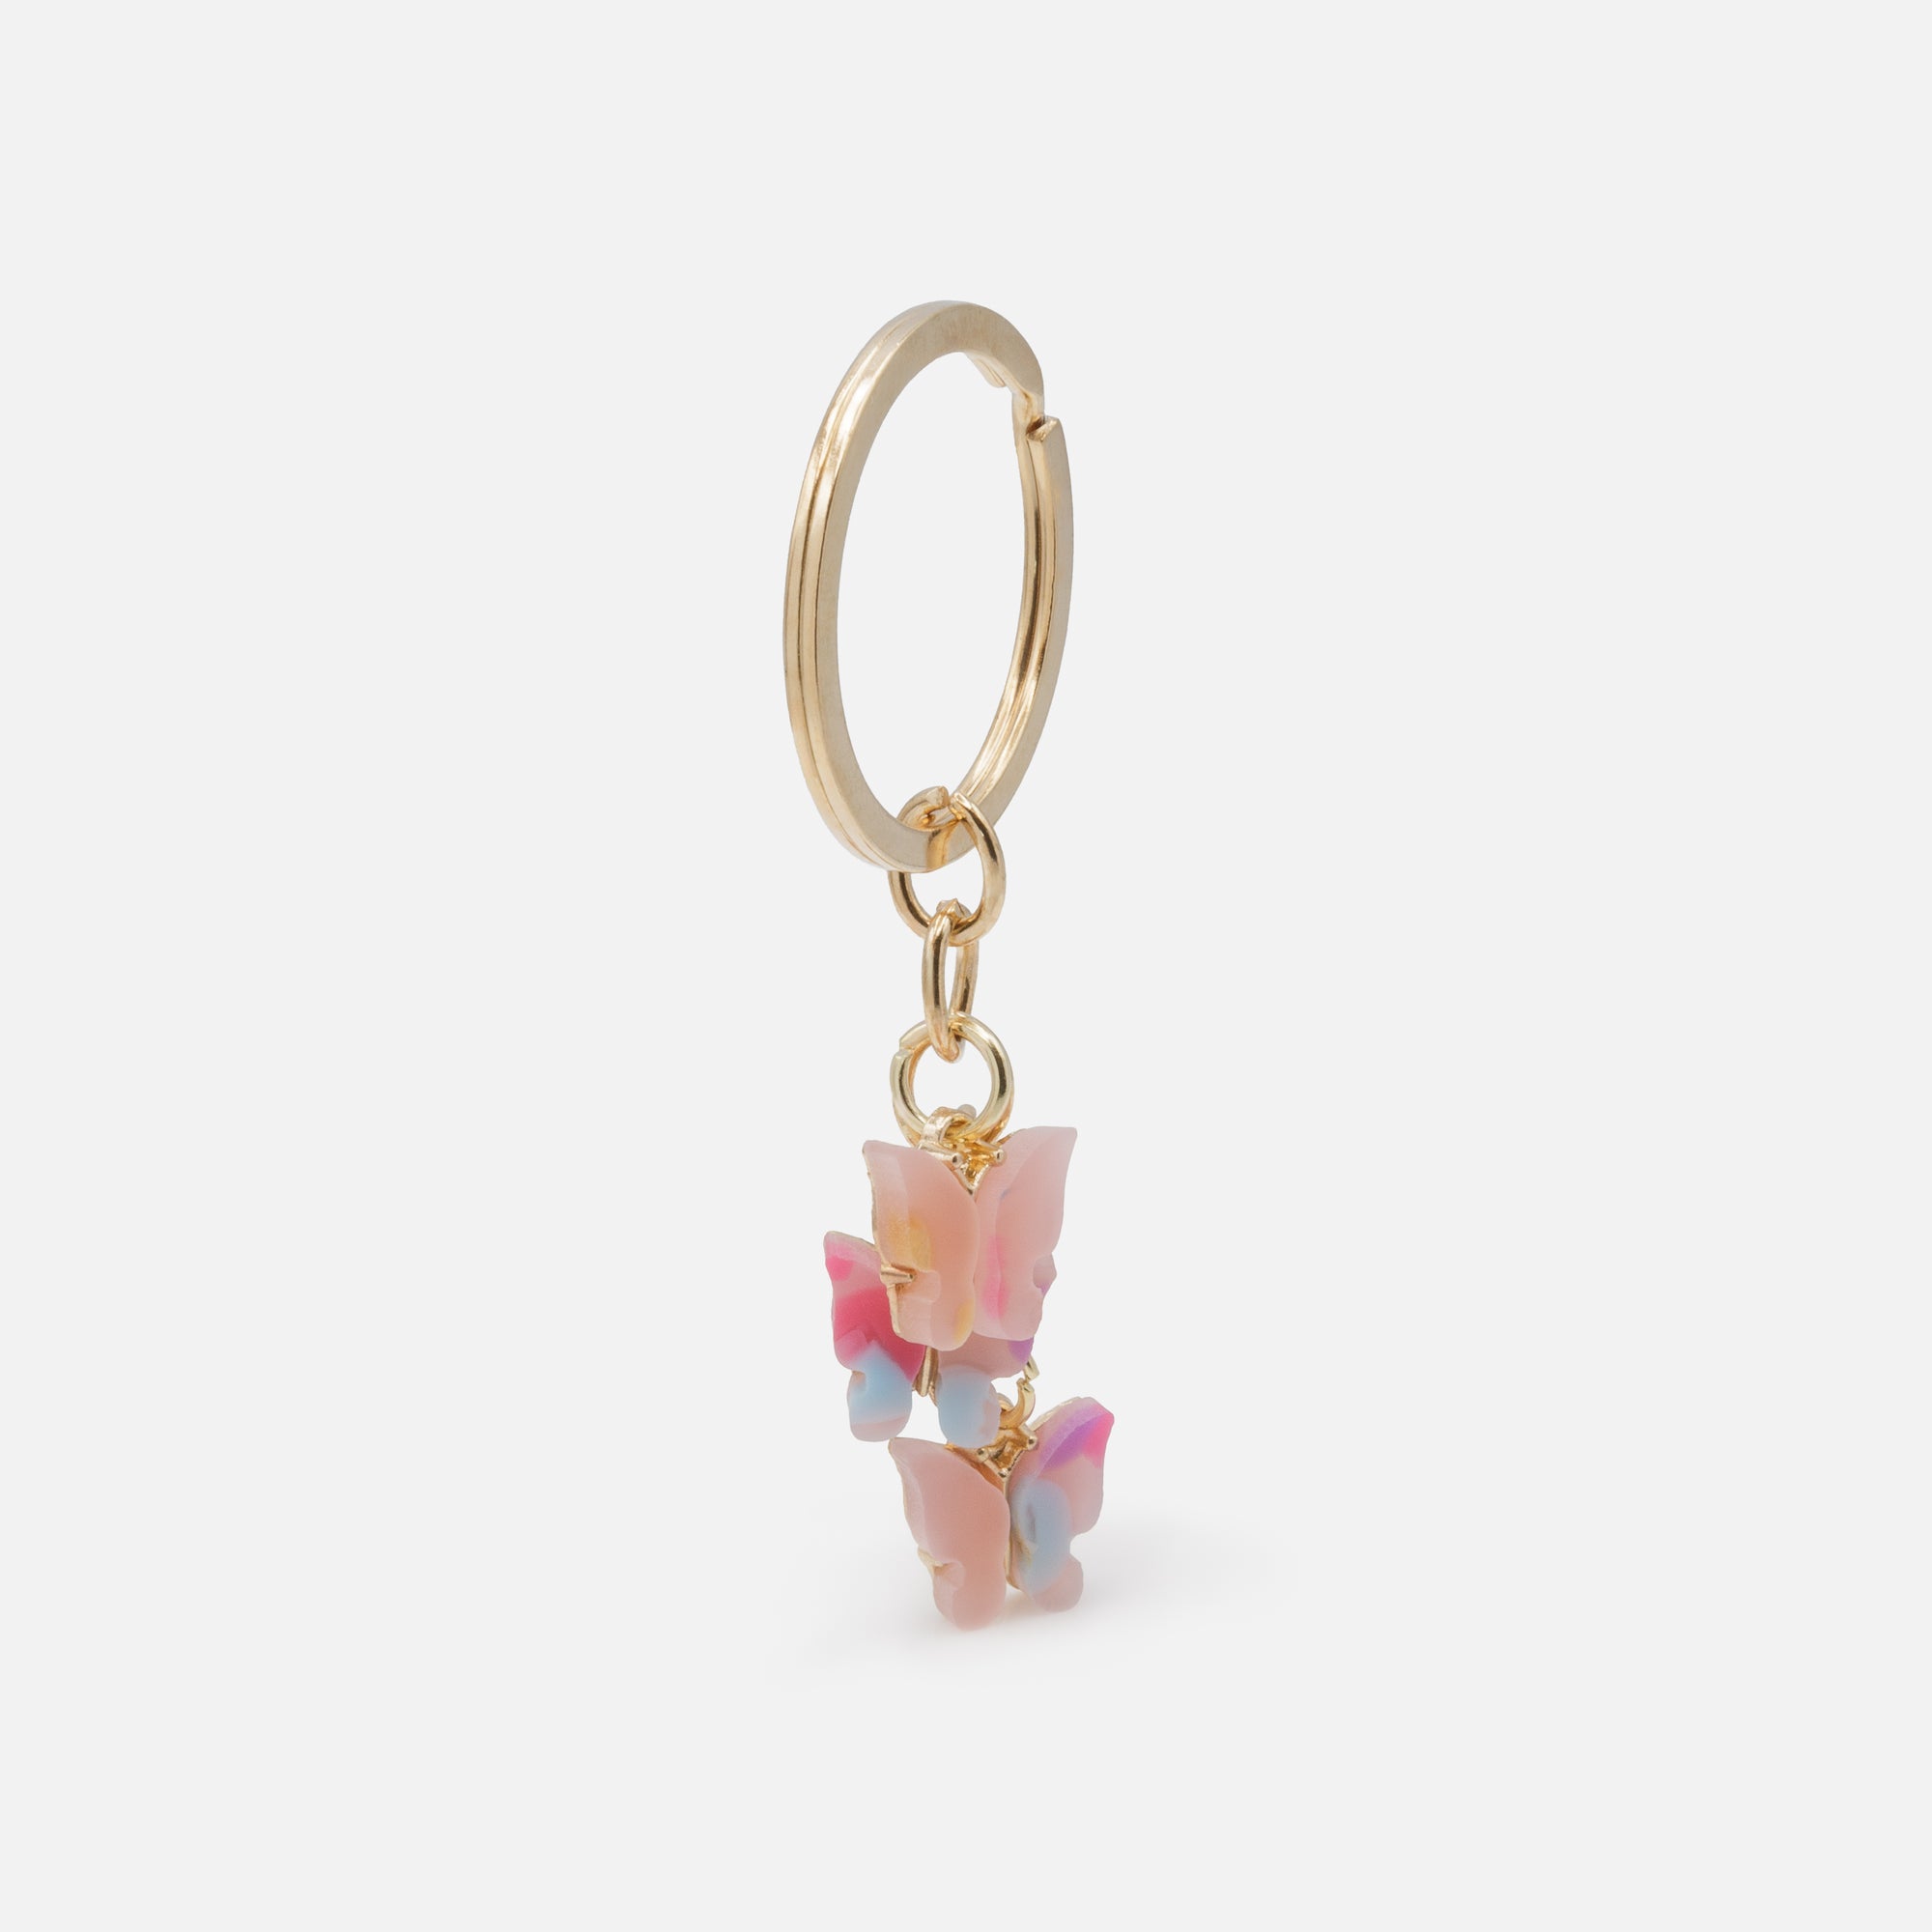 Golden key ring trio of multicolored butterflies